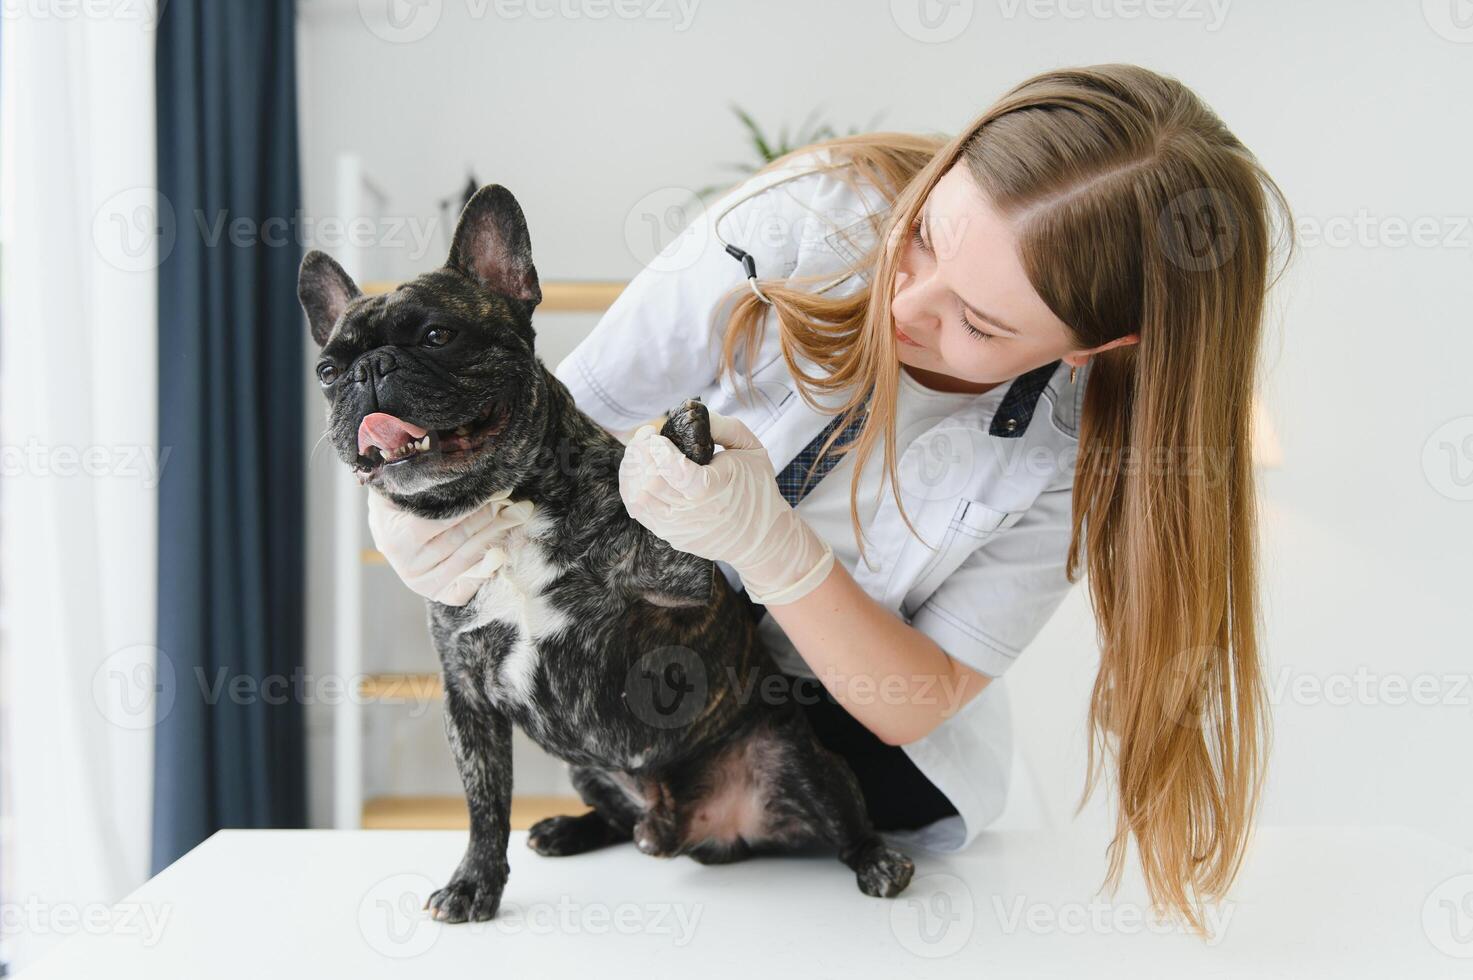 Veterinarian woman examines the dog and pet her. Animal healthcare hospital with professional pet help photo